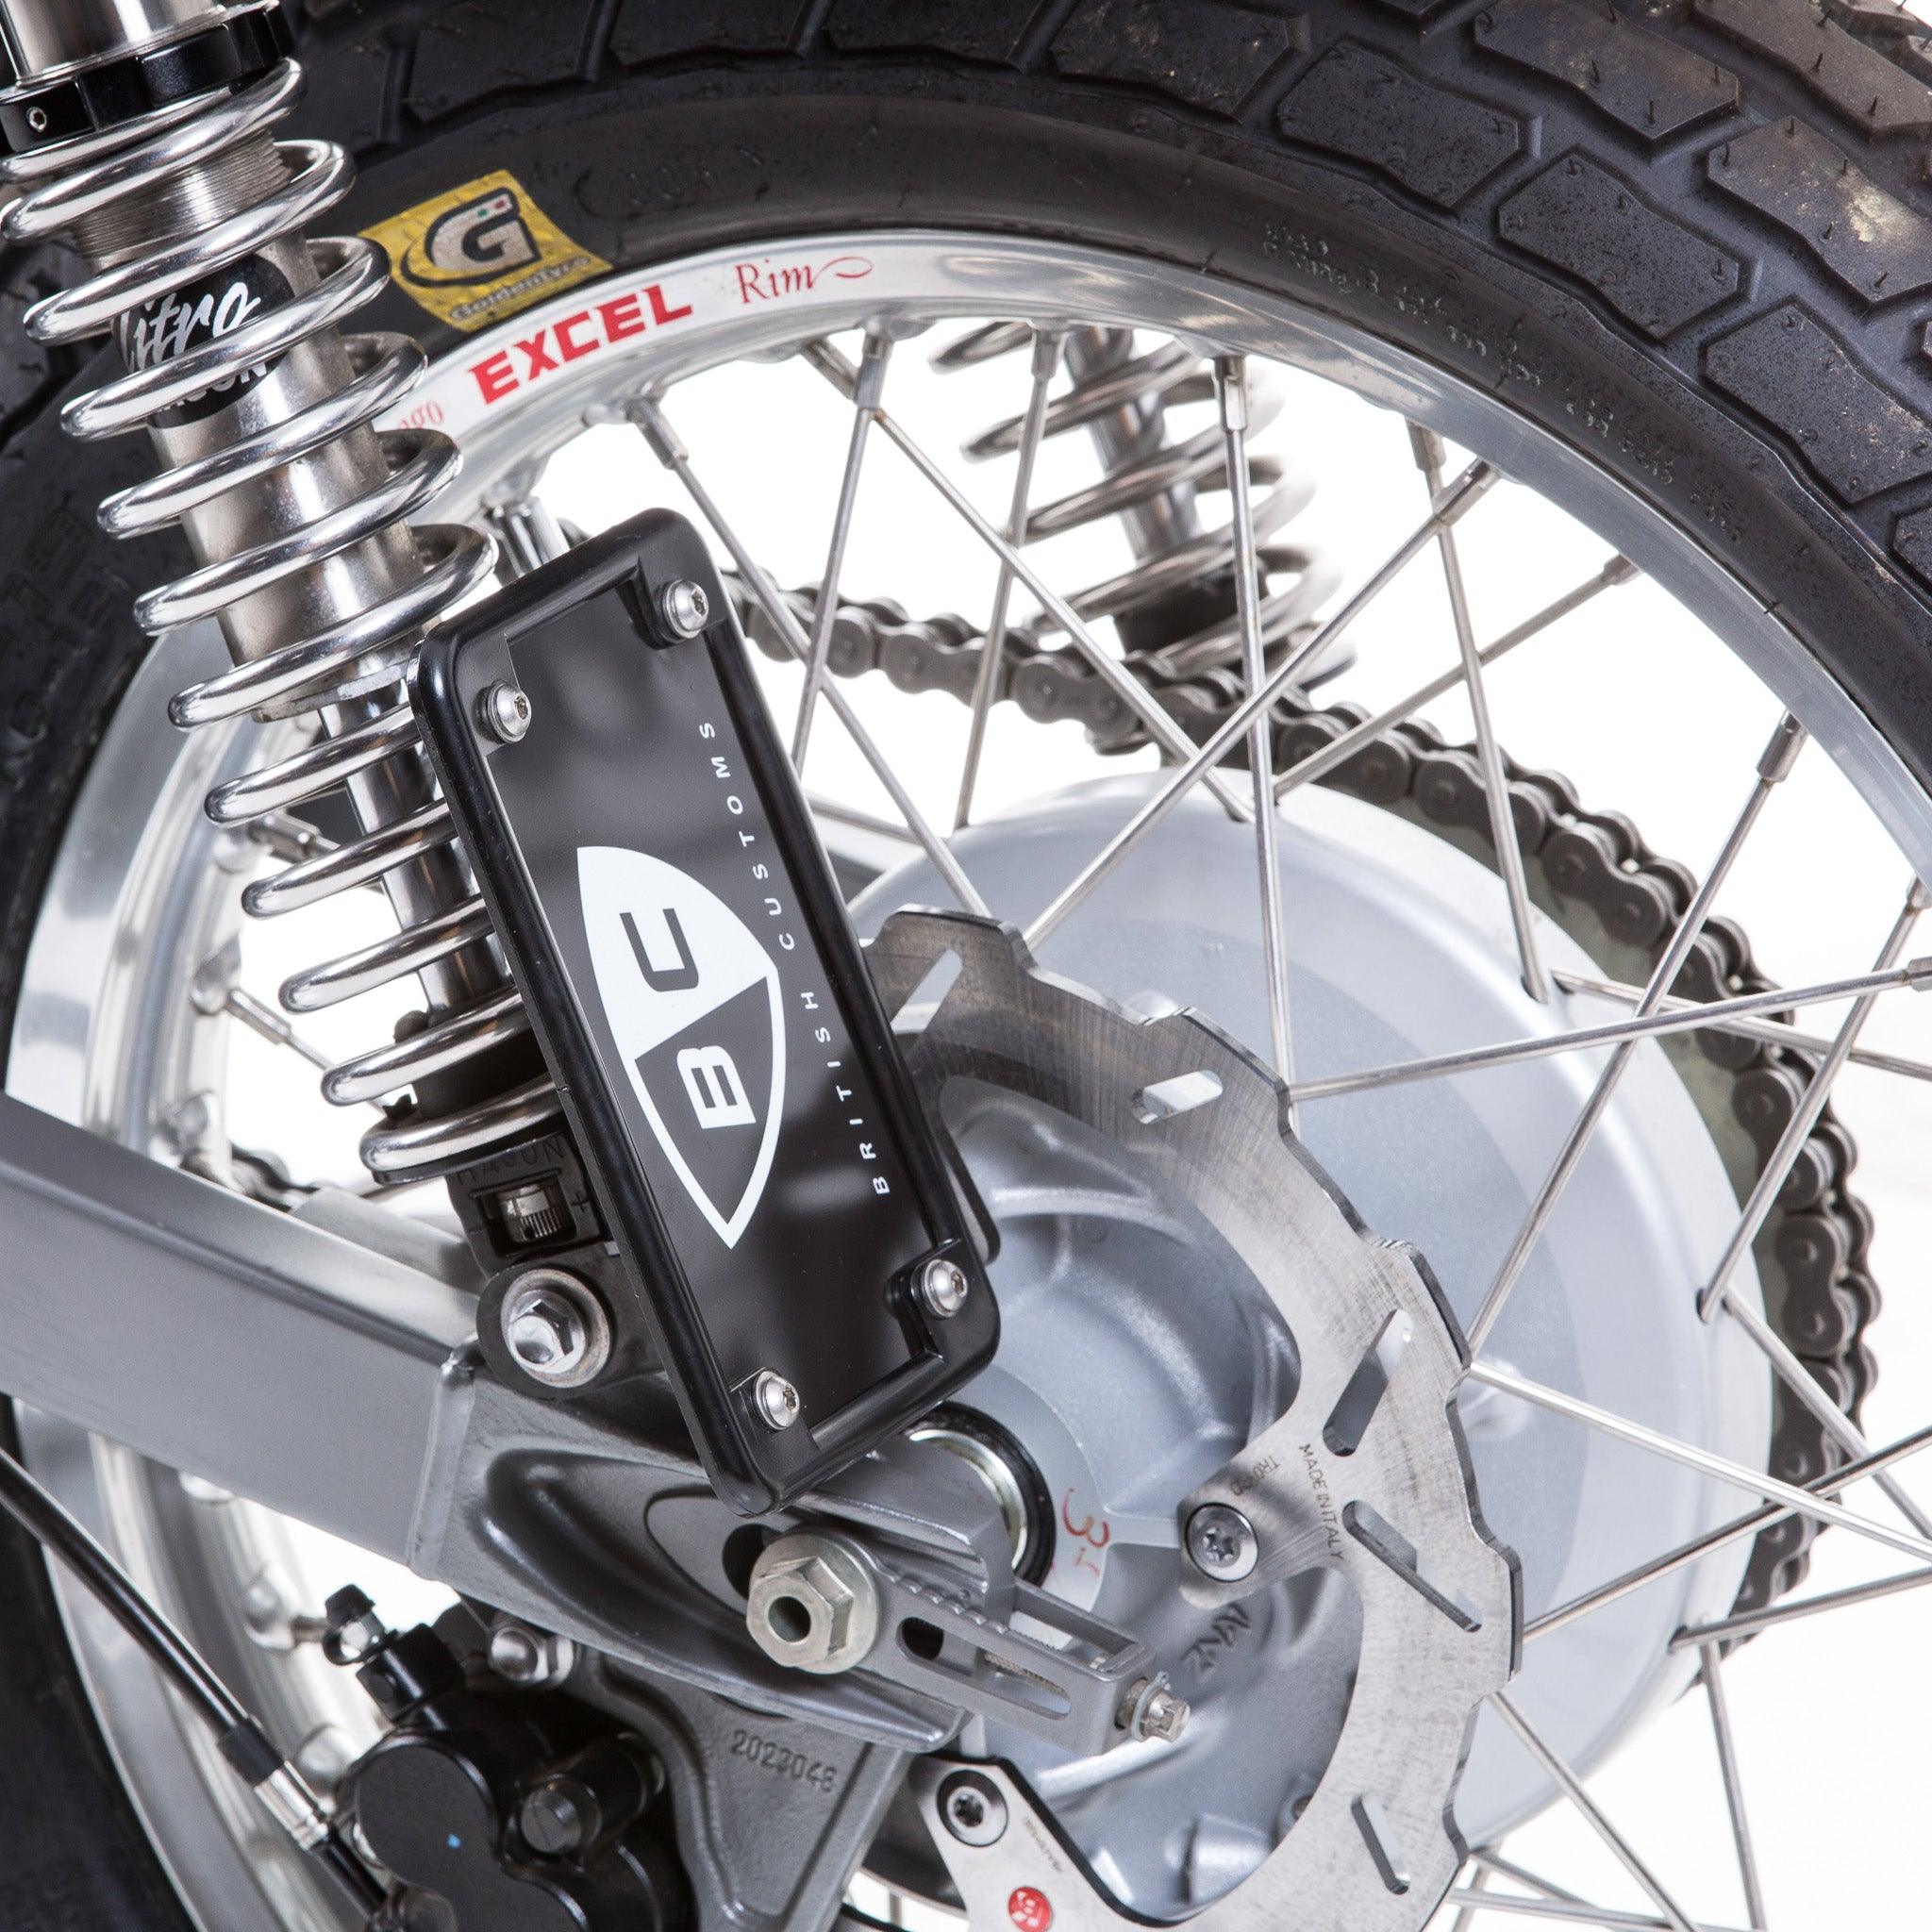 Top-Notch 8mm Shock Mount License Plate for Triumph Motorcycles - British Customs